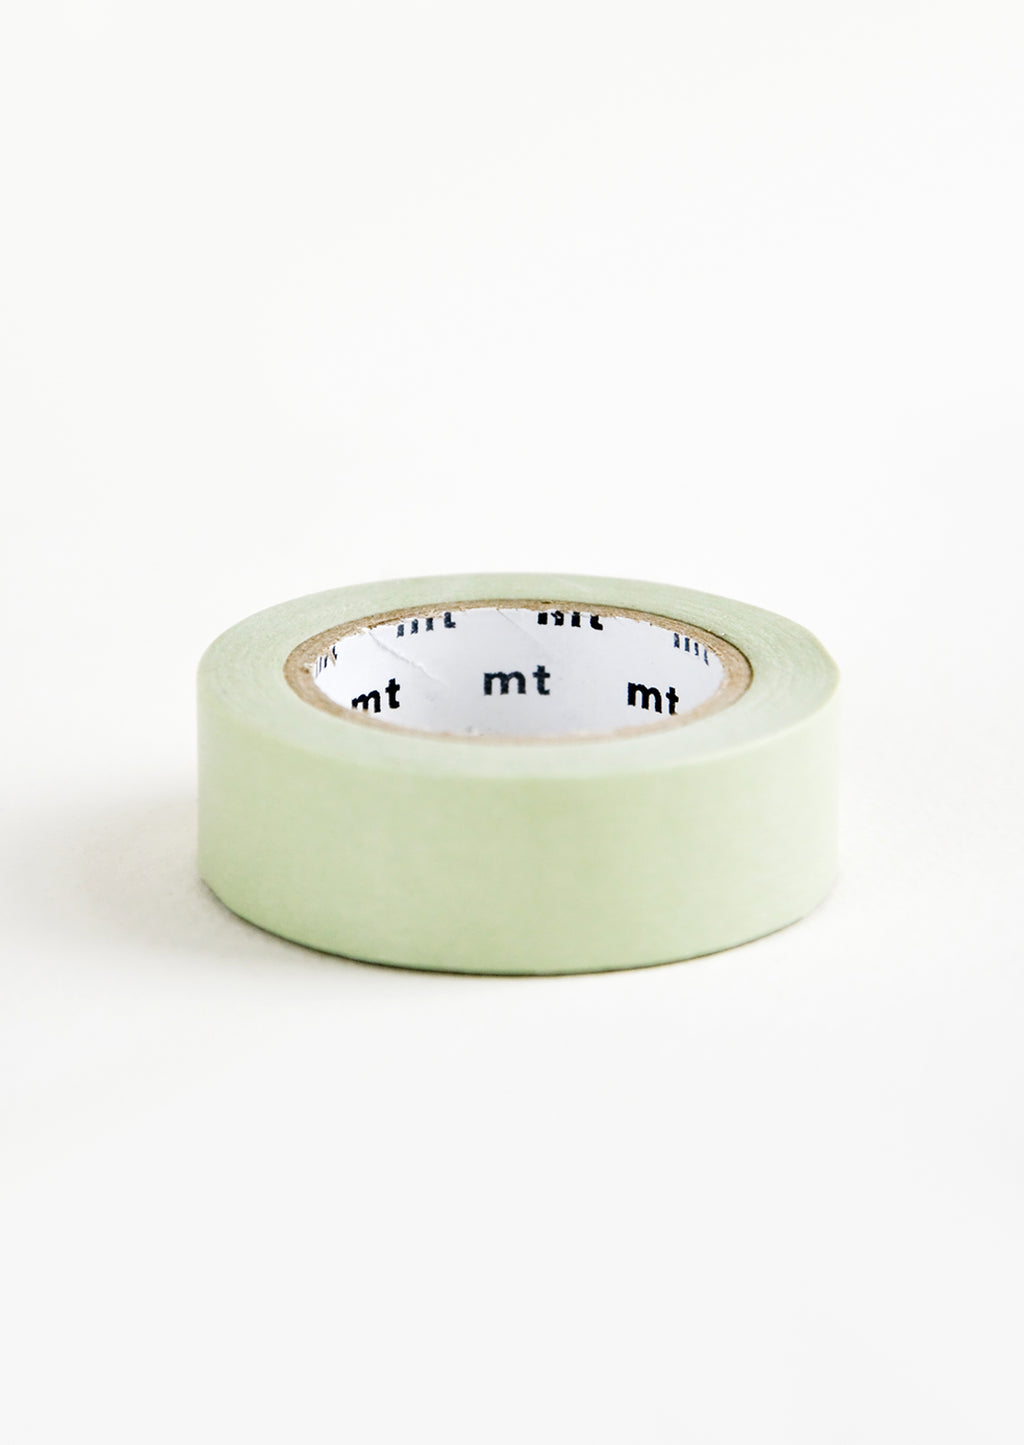 Eucalyptus: A roll of washi tape in pale green color.